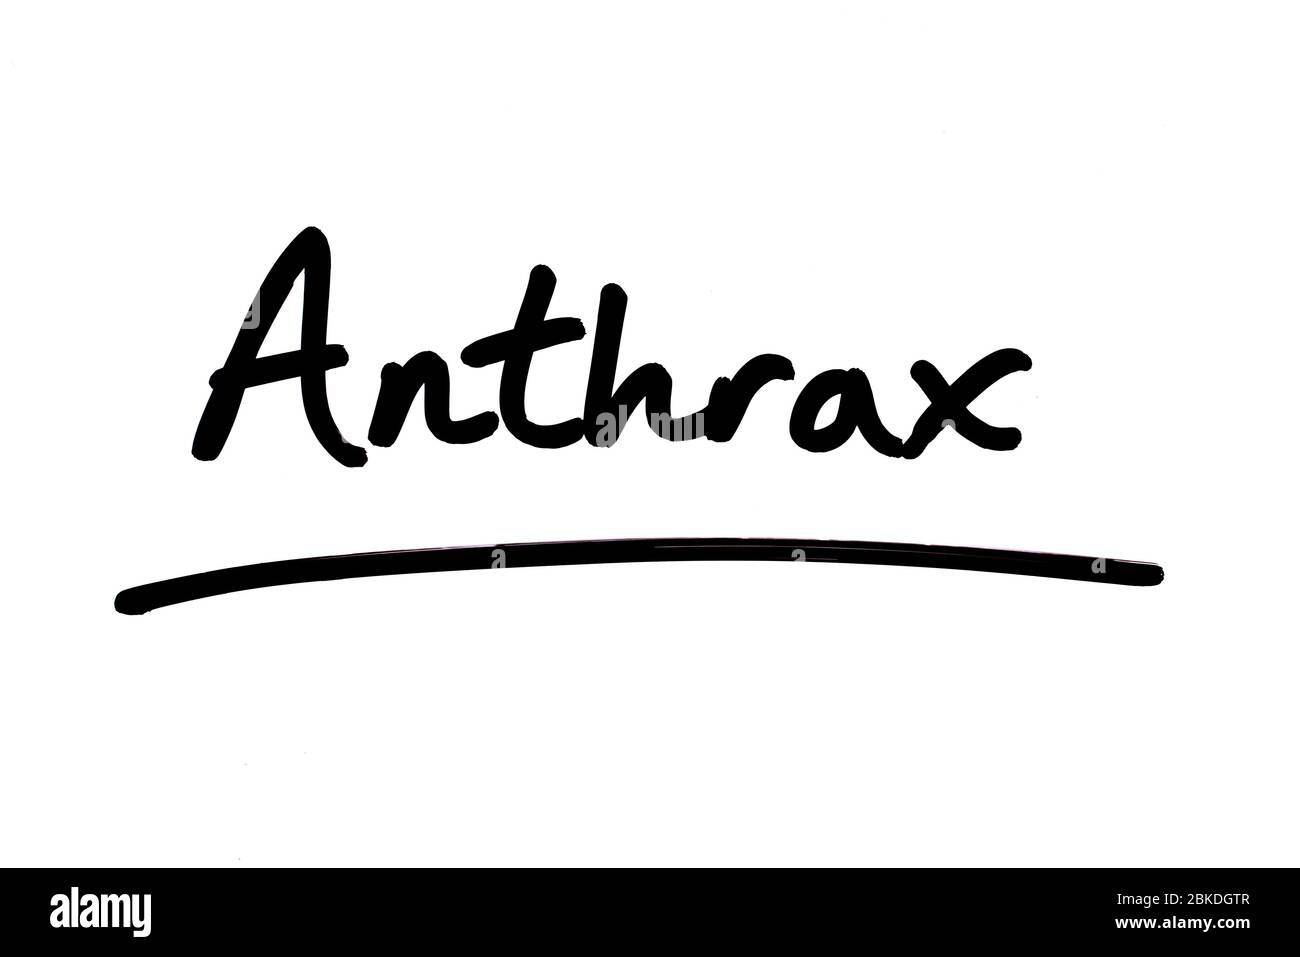 Anthrax handwritten on a white background. Stock Photo